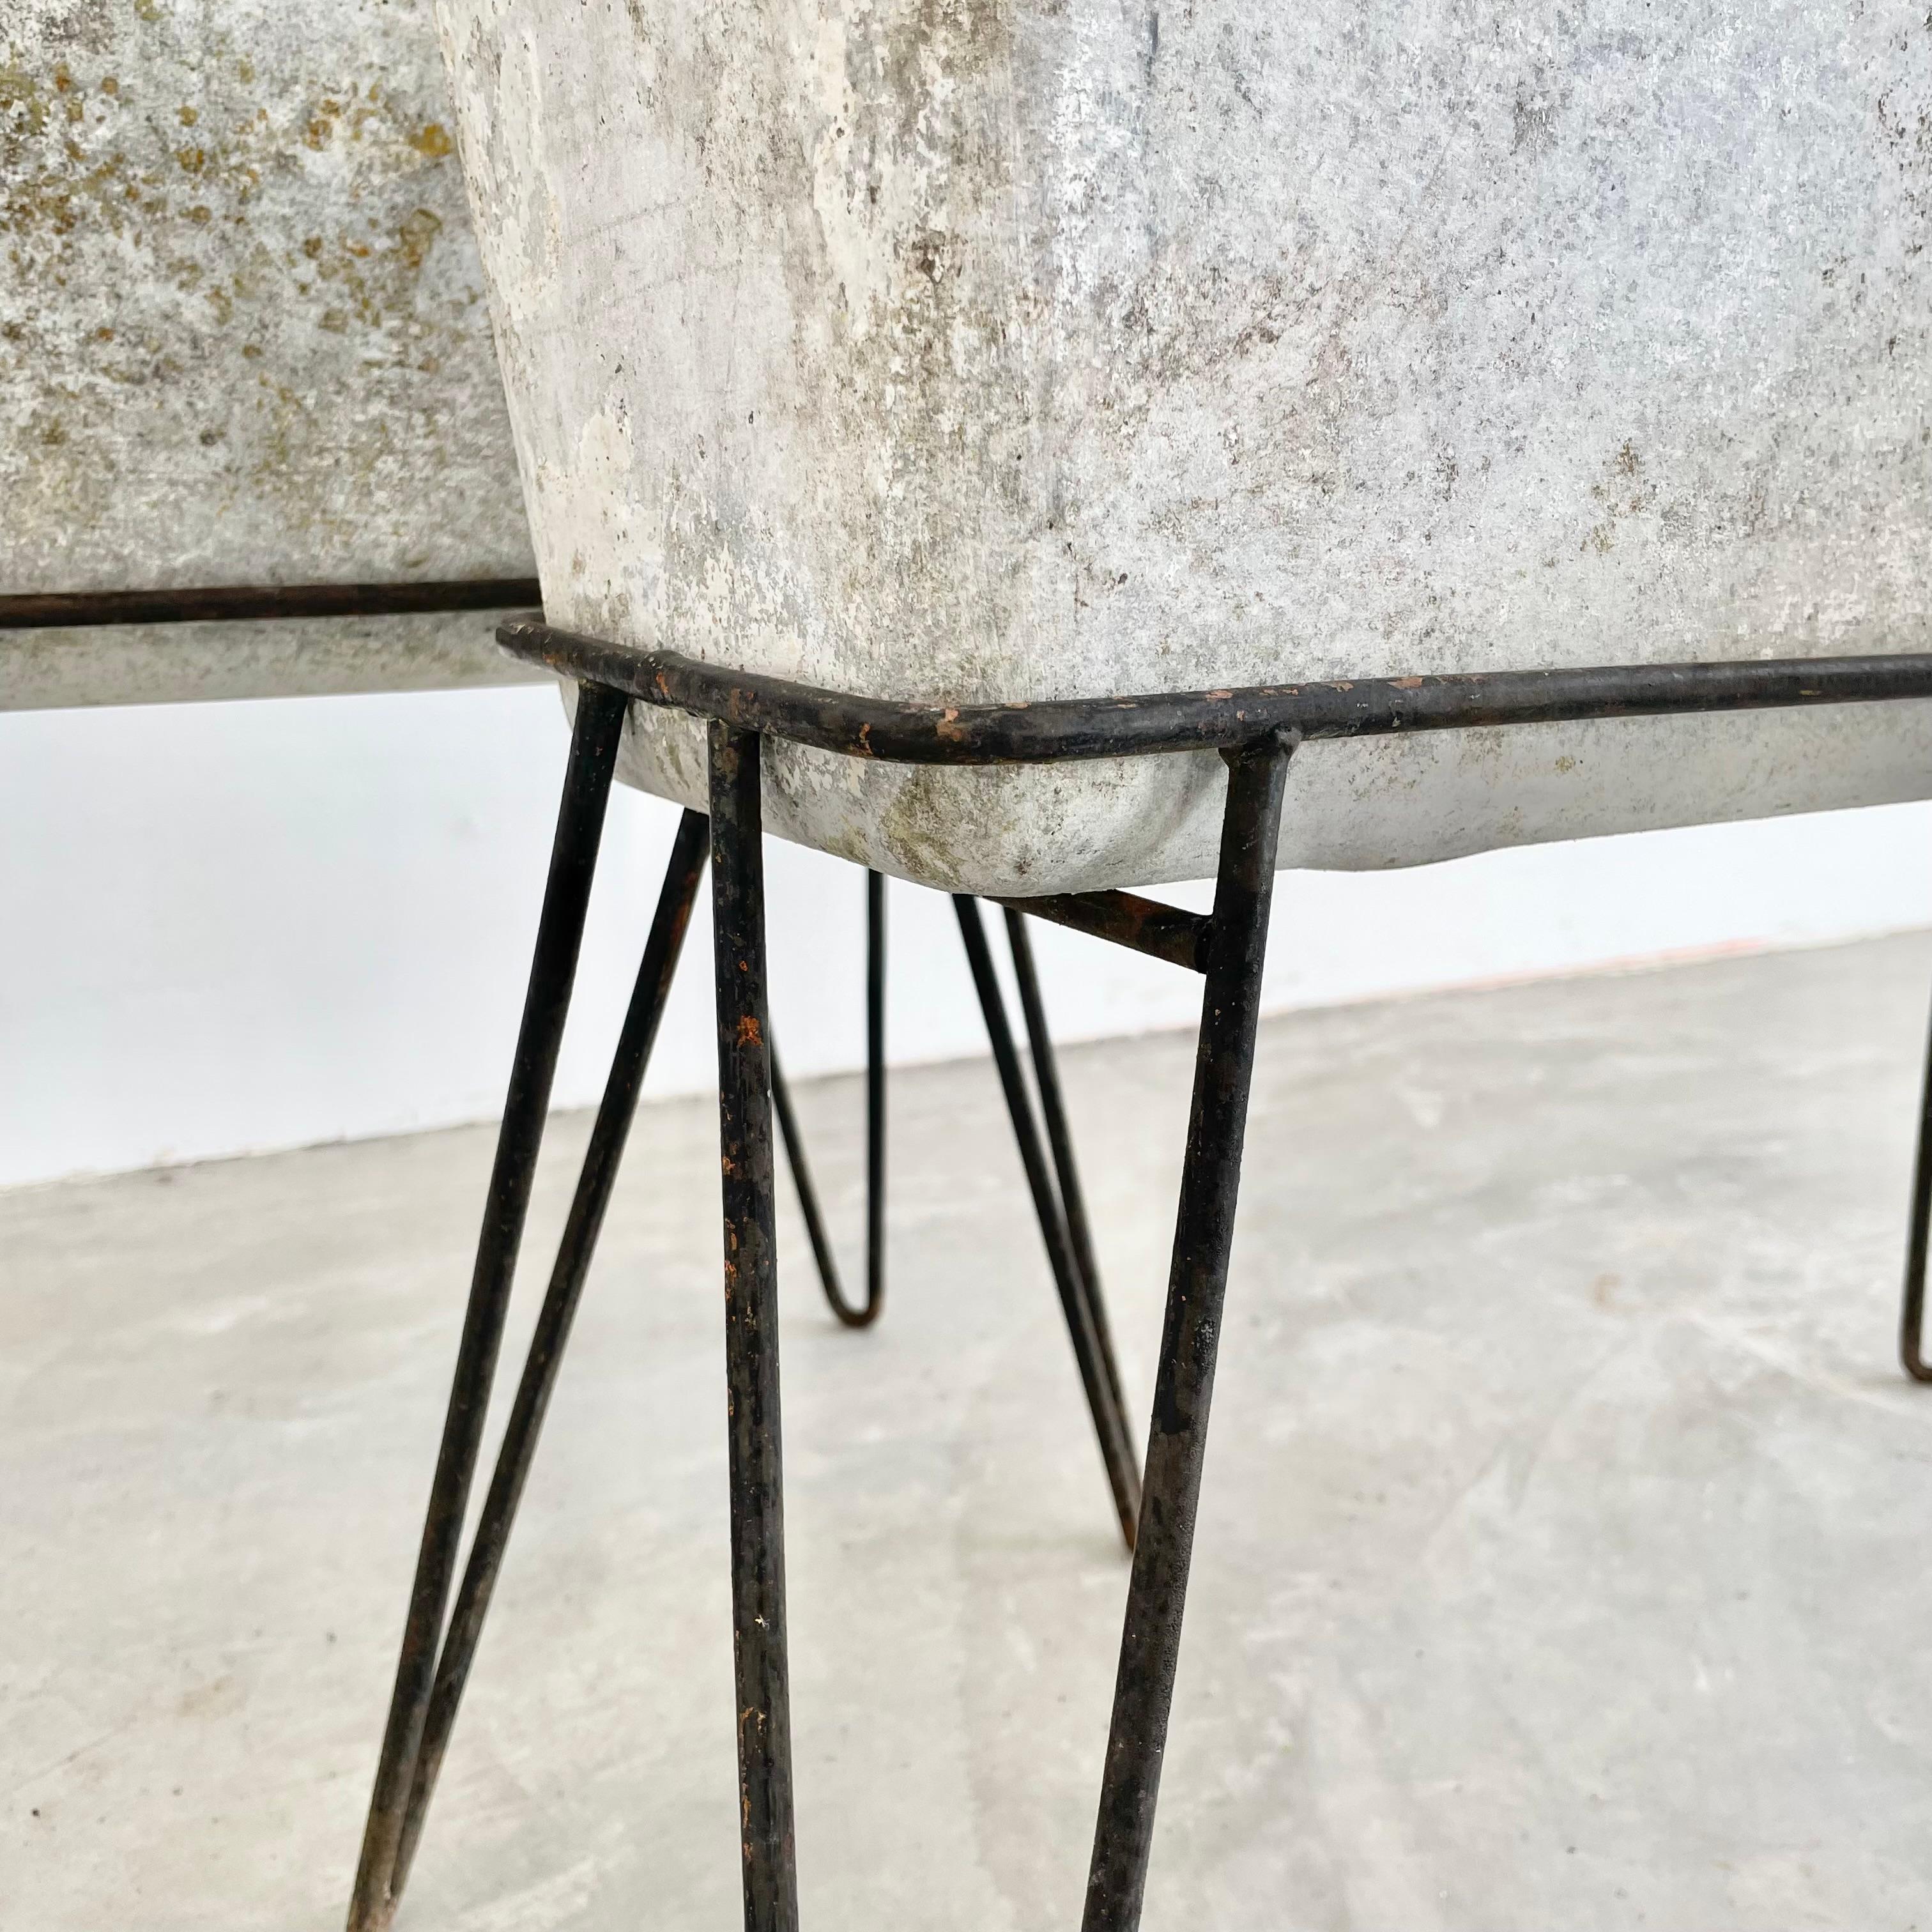 Willy Guhl Concrete Trough Planter on Iron Hairpin Stand, 1975 Switzerland For Sale 4